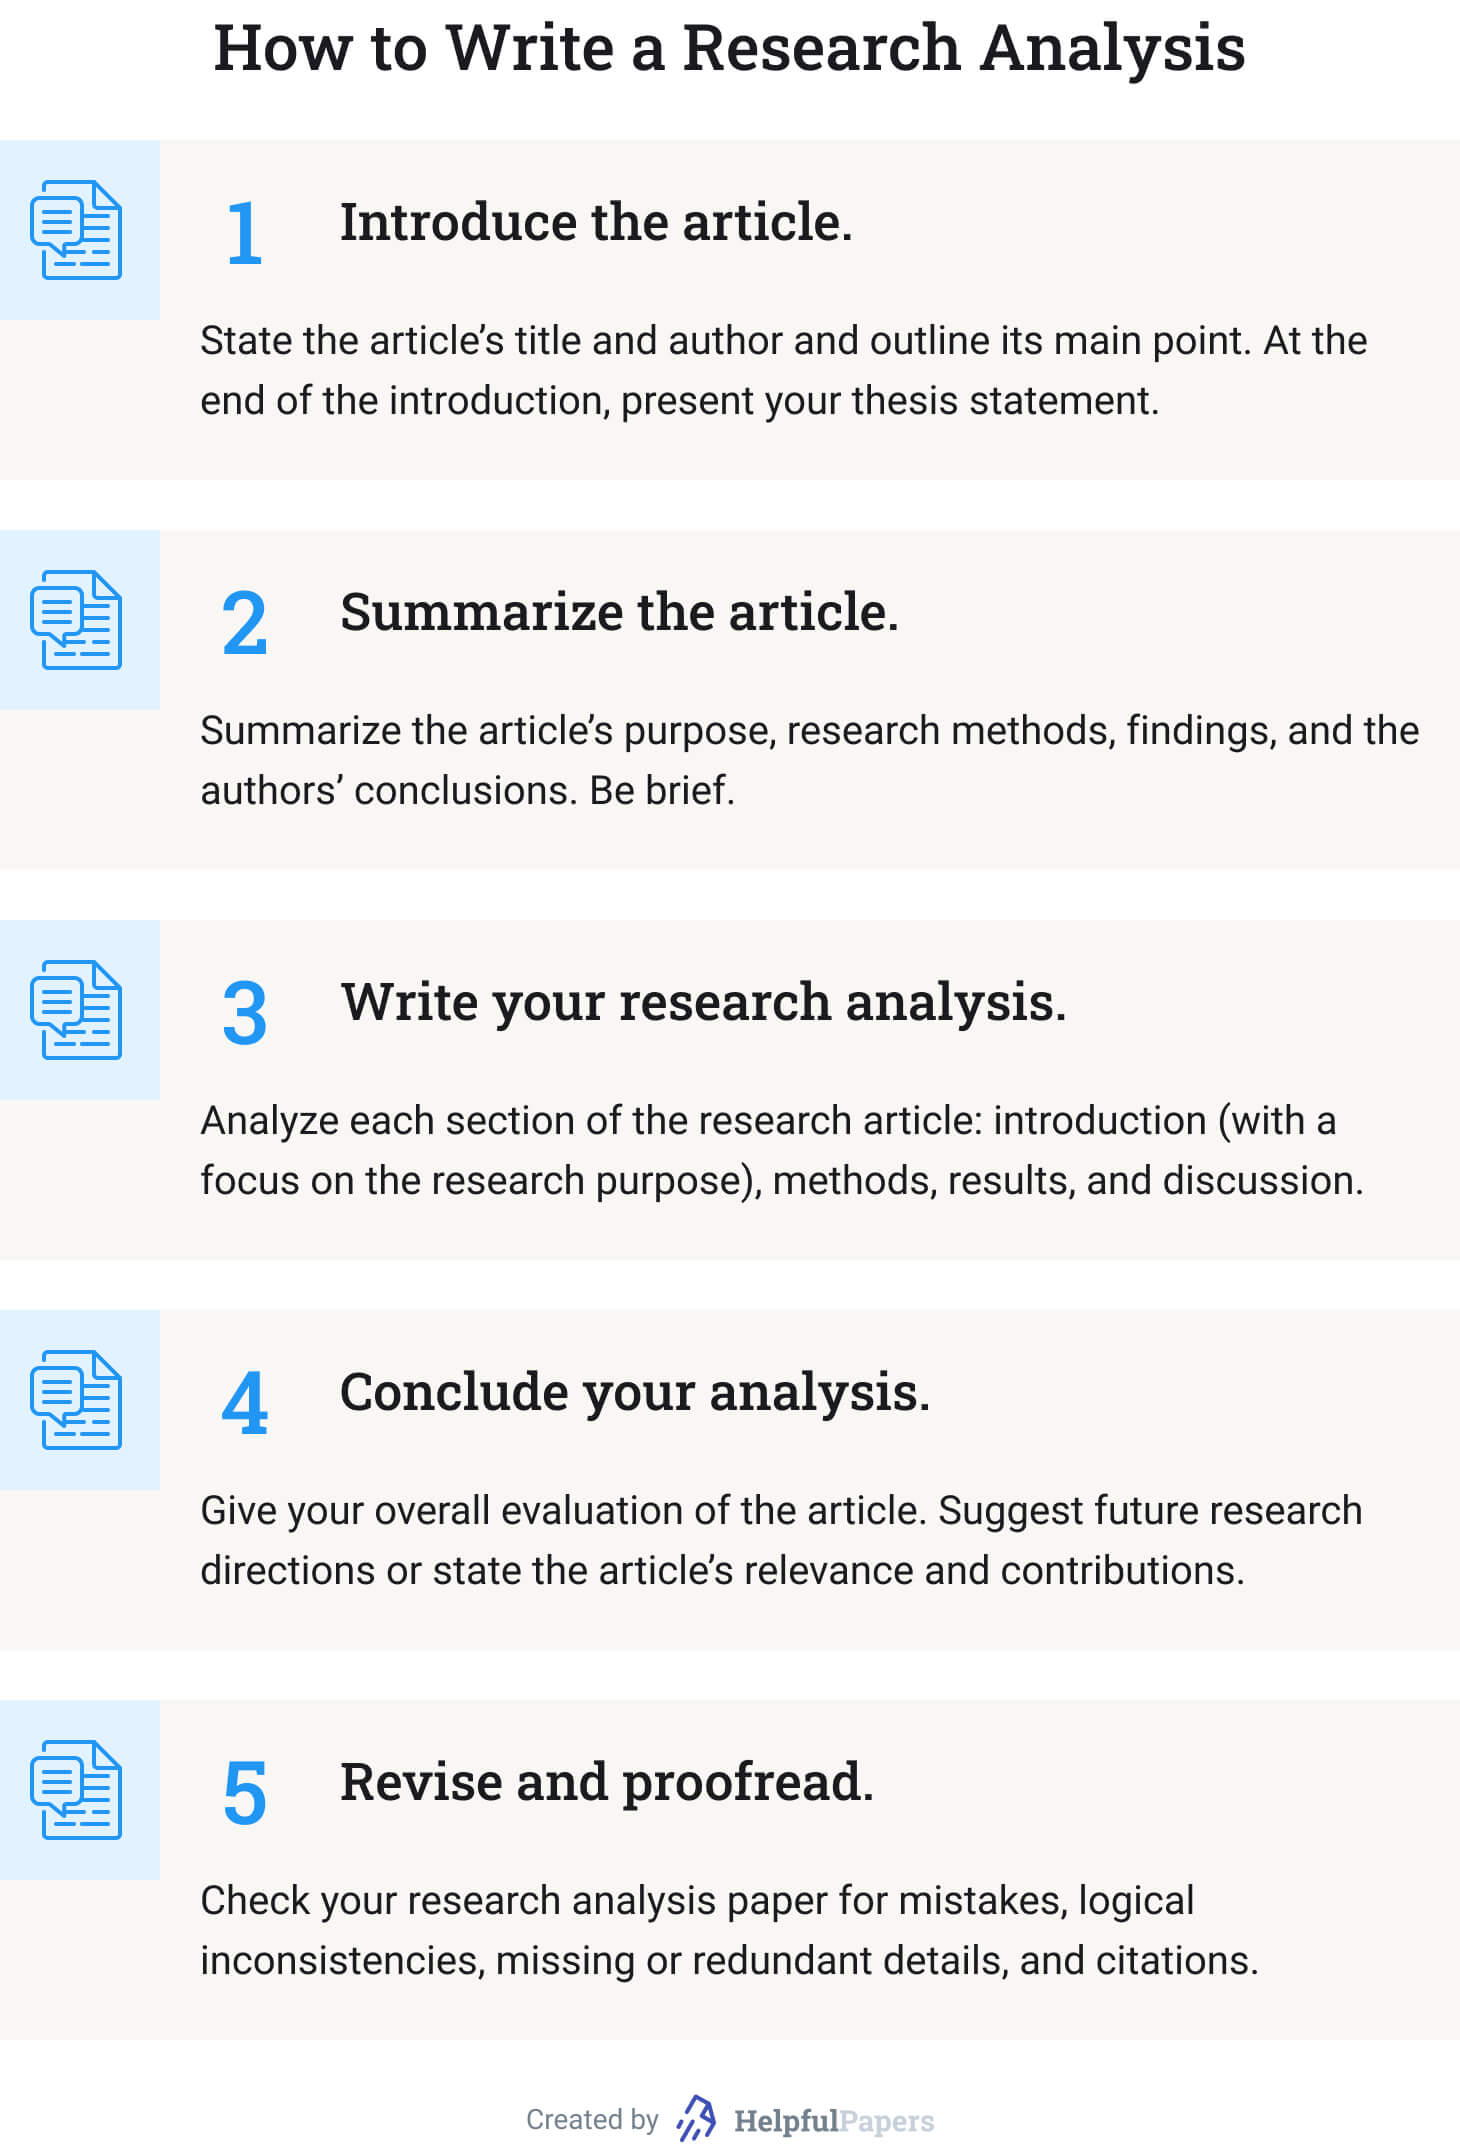 Research Paper Analysis: How to Analyze a Research Article + Example